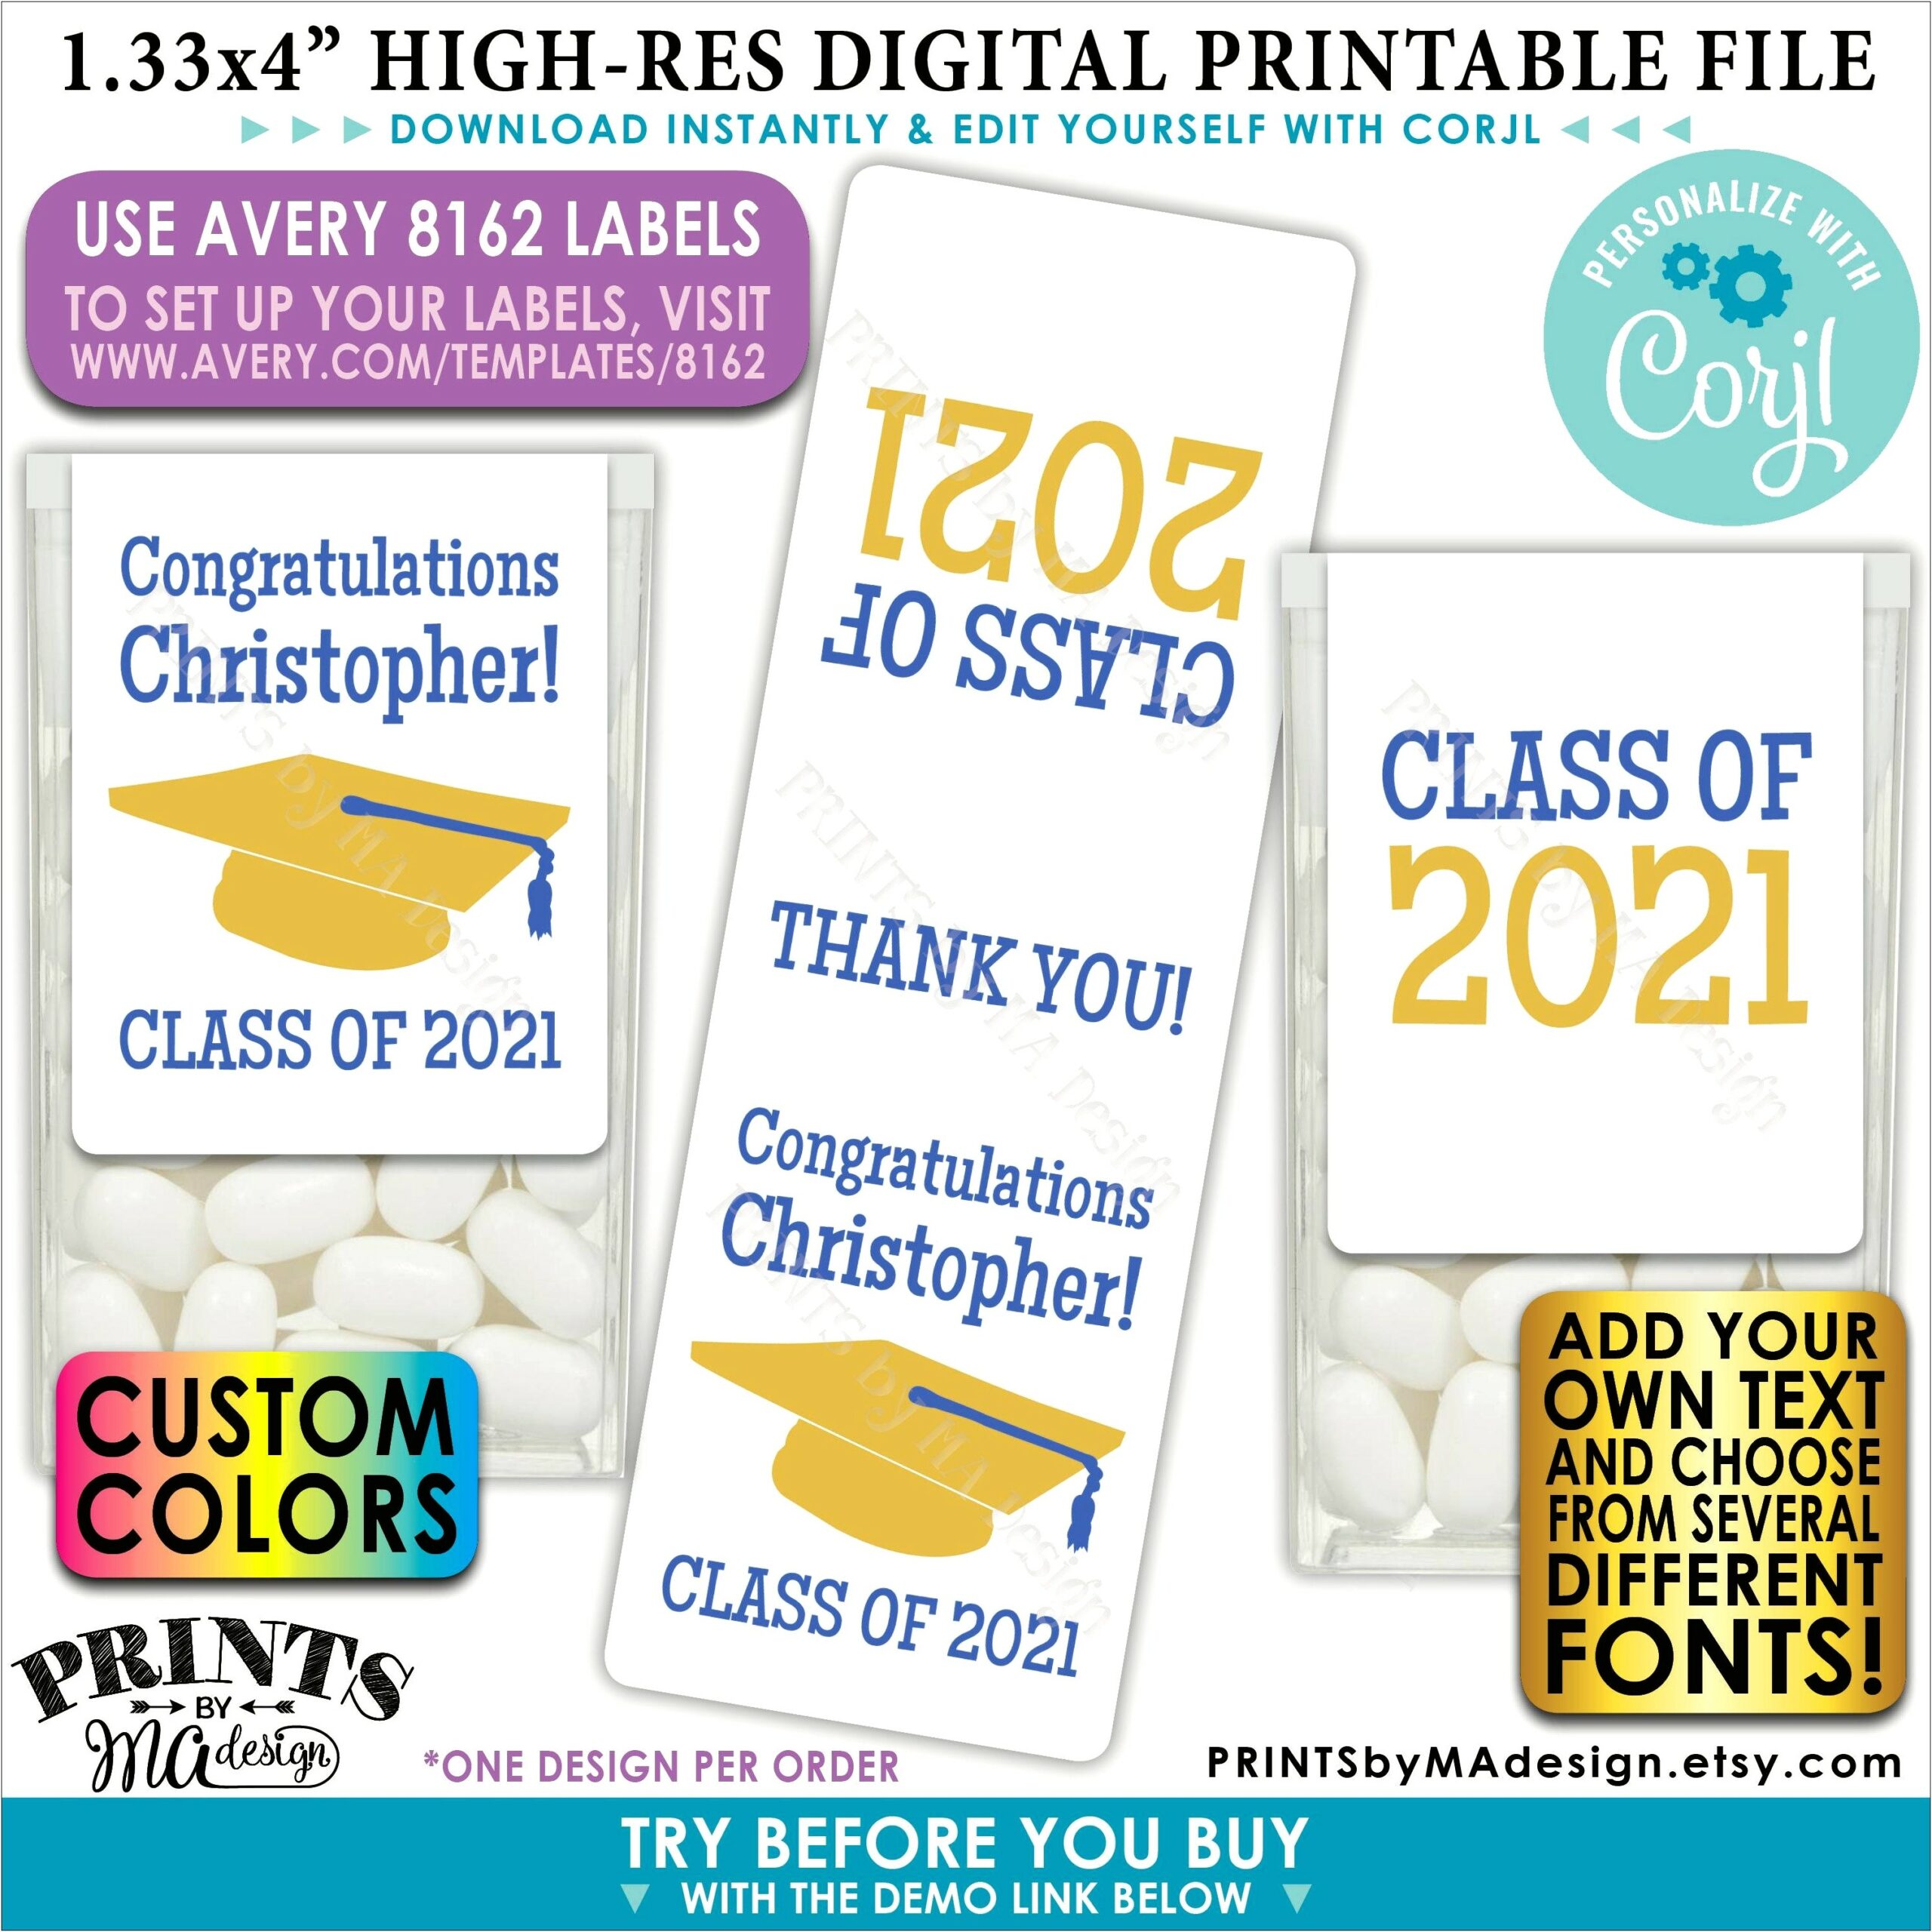 Free Template For Avery 8162 Labels